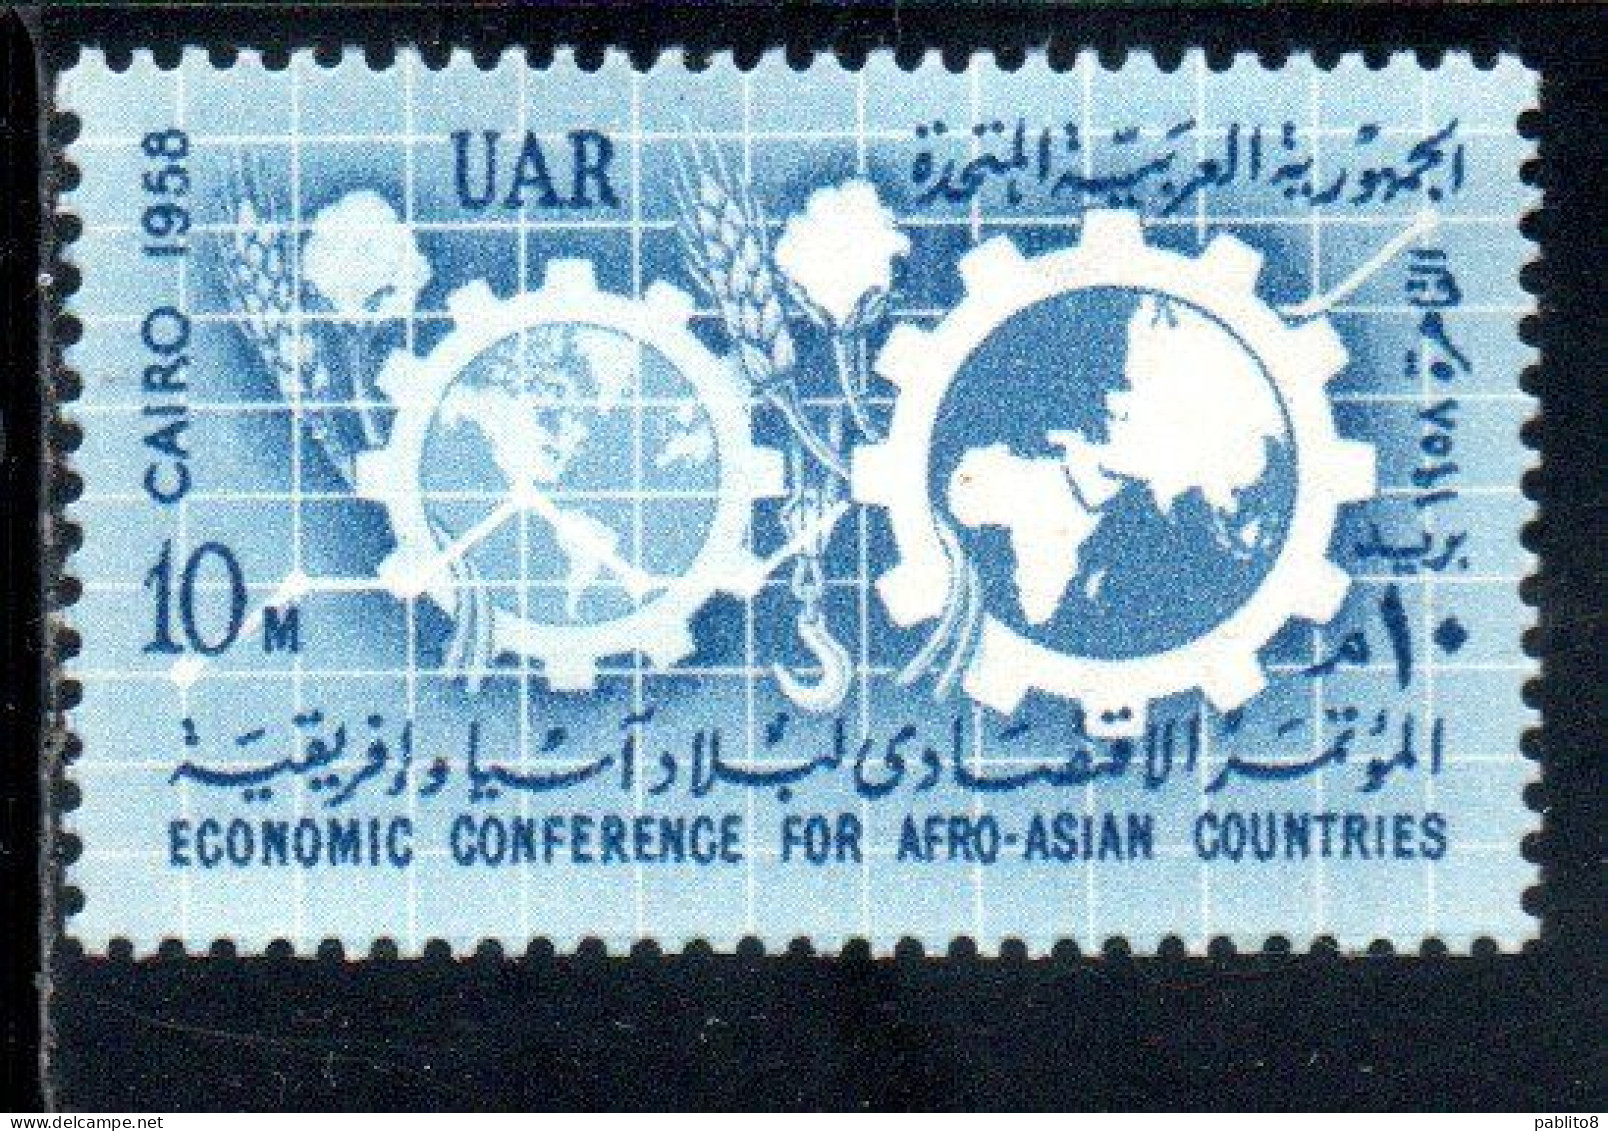 UAR EGYPT EGITTO 1958 ECONOMIC CONFERENCE OF AFRO-ASIAN COUNTRIES CAIRO MAPS AND COGWHEELS 10m MNH - Neufs